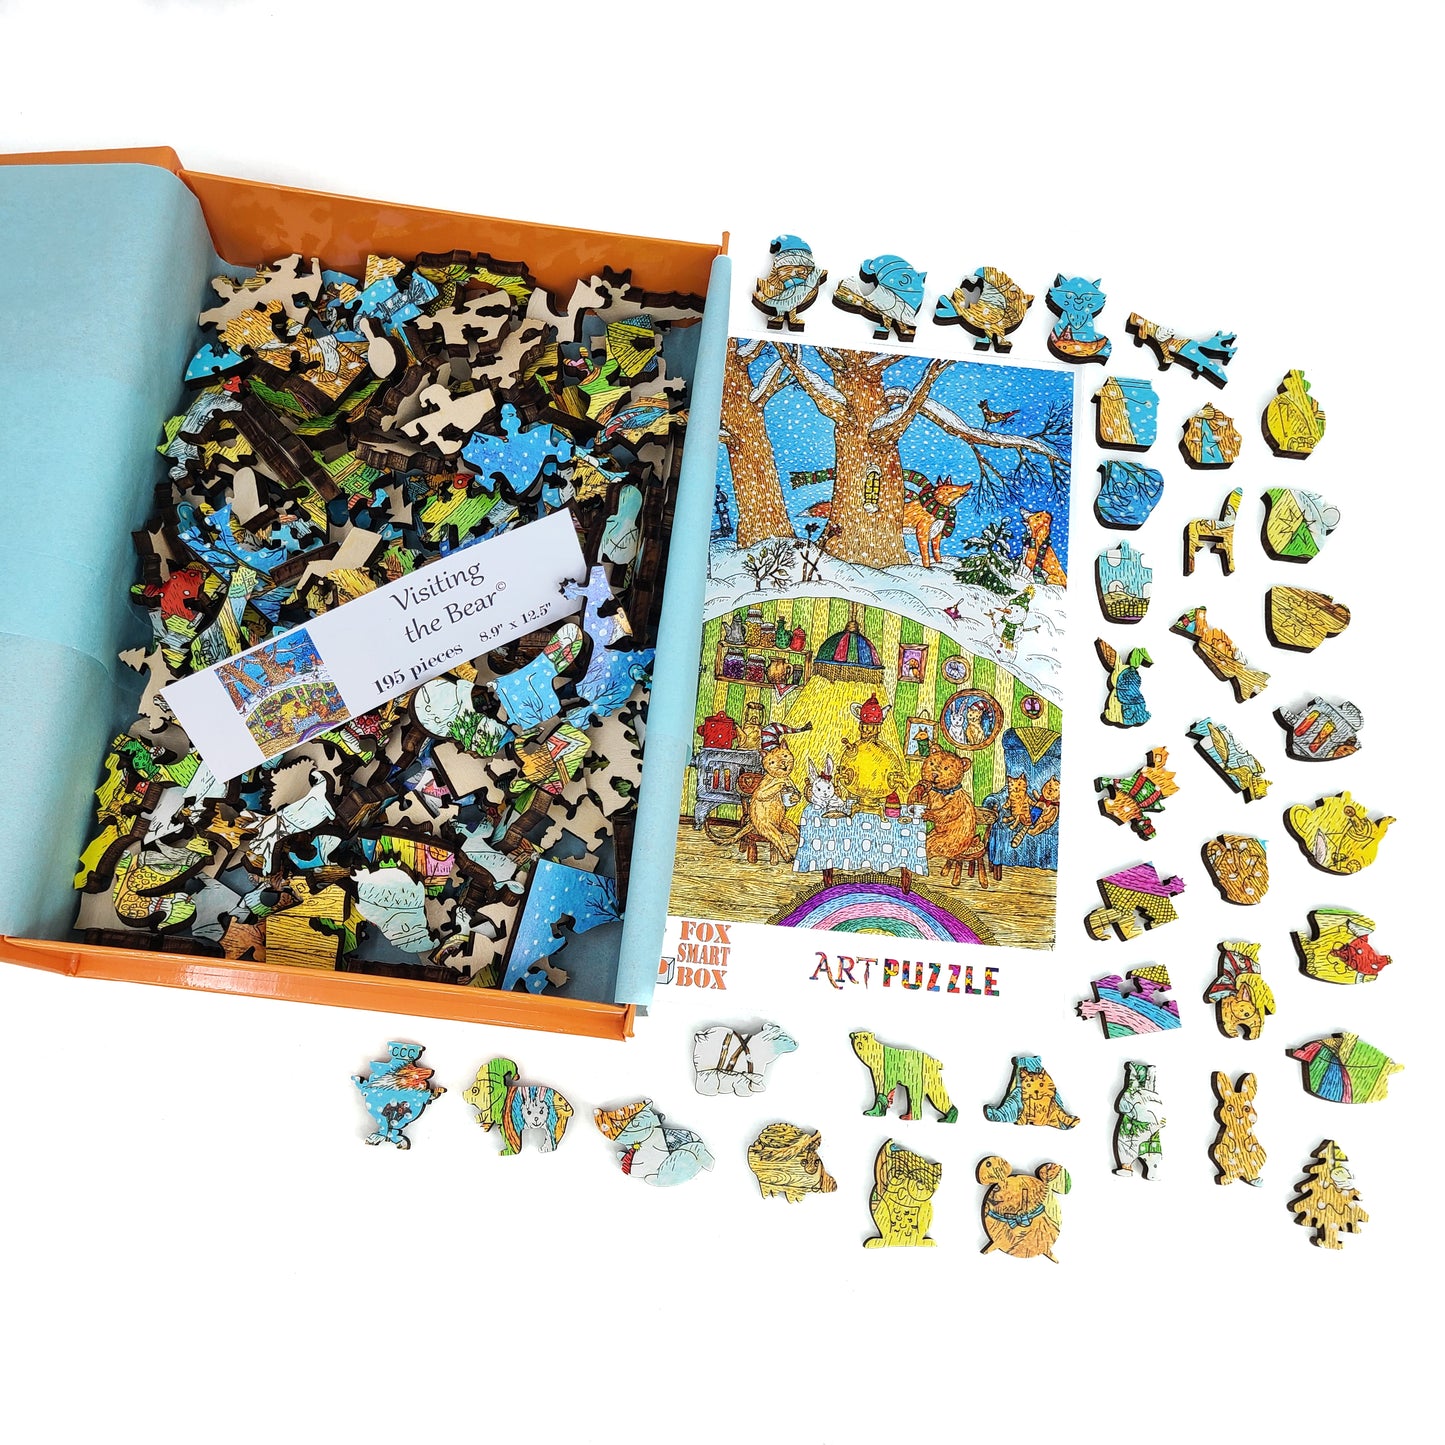 Wooden Jigsaw Puzzle with Uniquely Shaped Pieces for Adults - 195 Pieces - Visiting the Bear